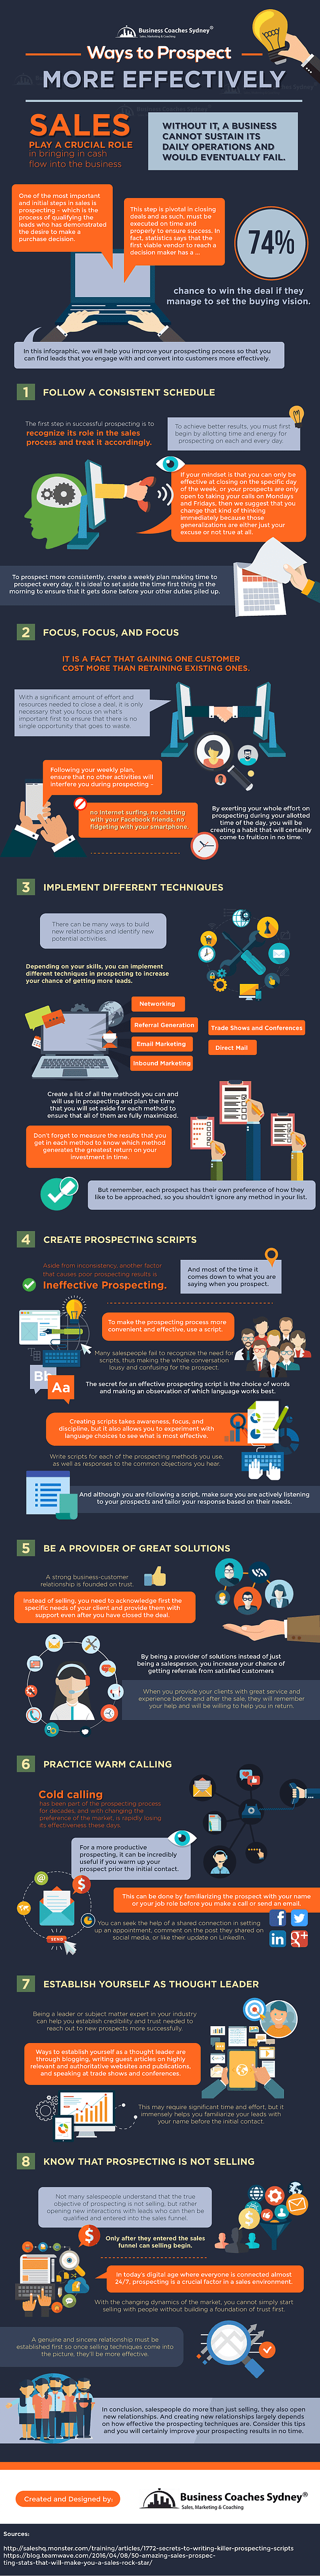 infographic ways to prospect more effectively